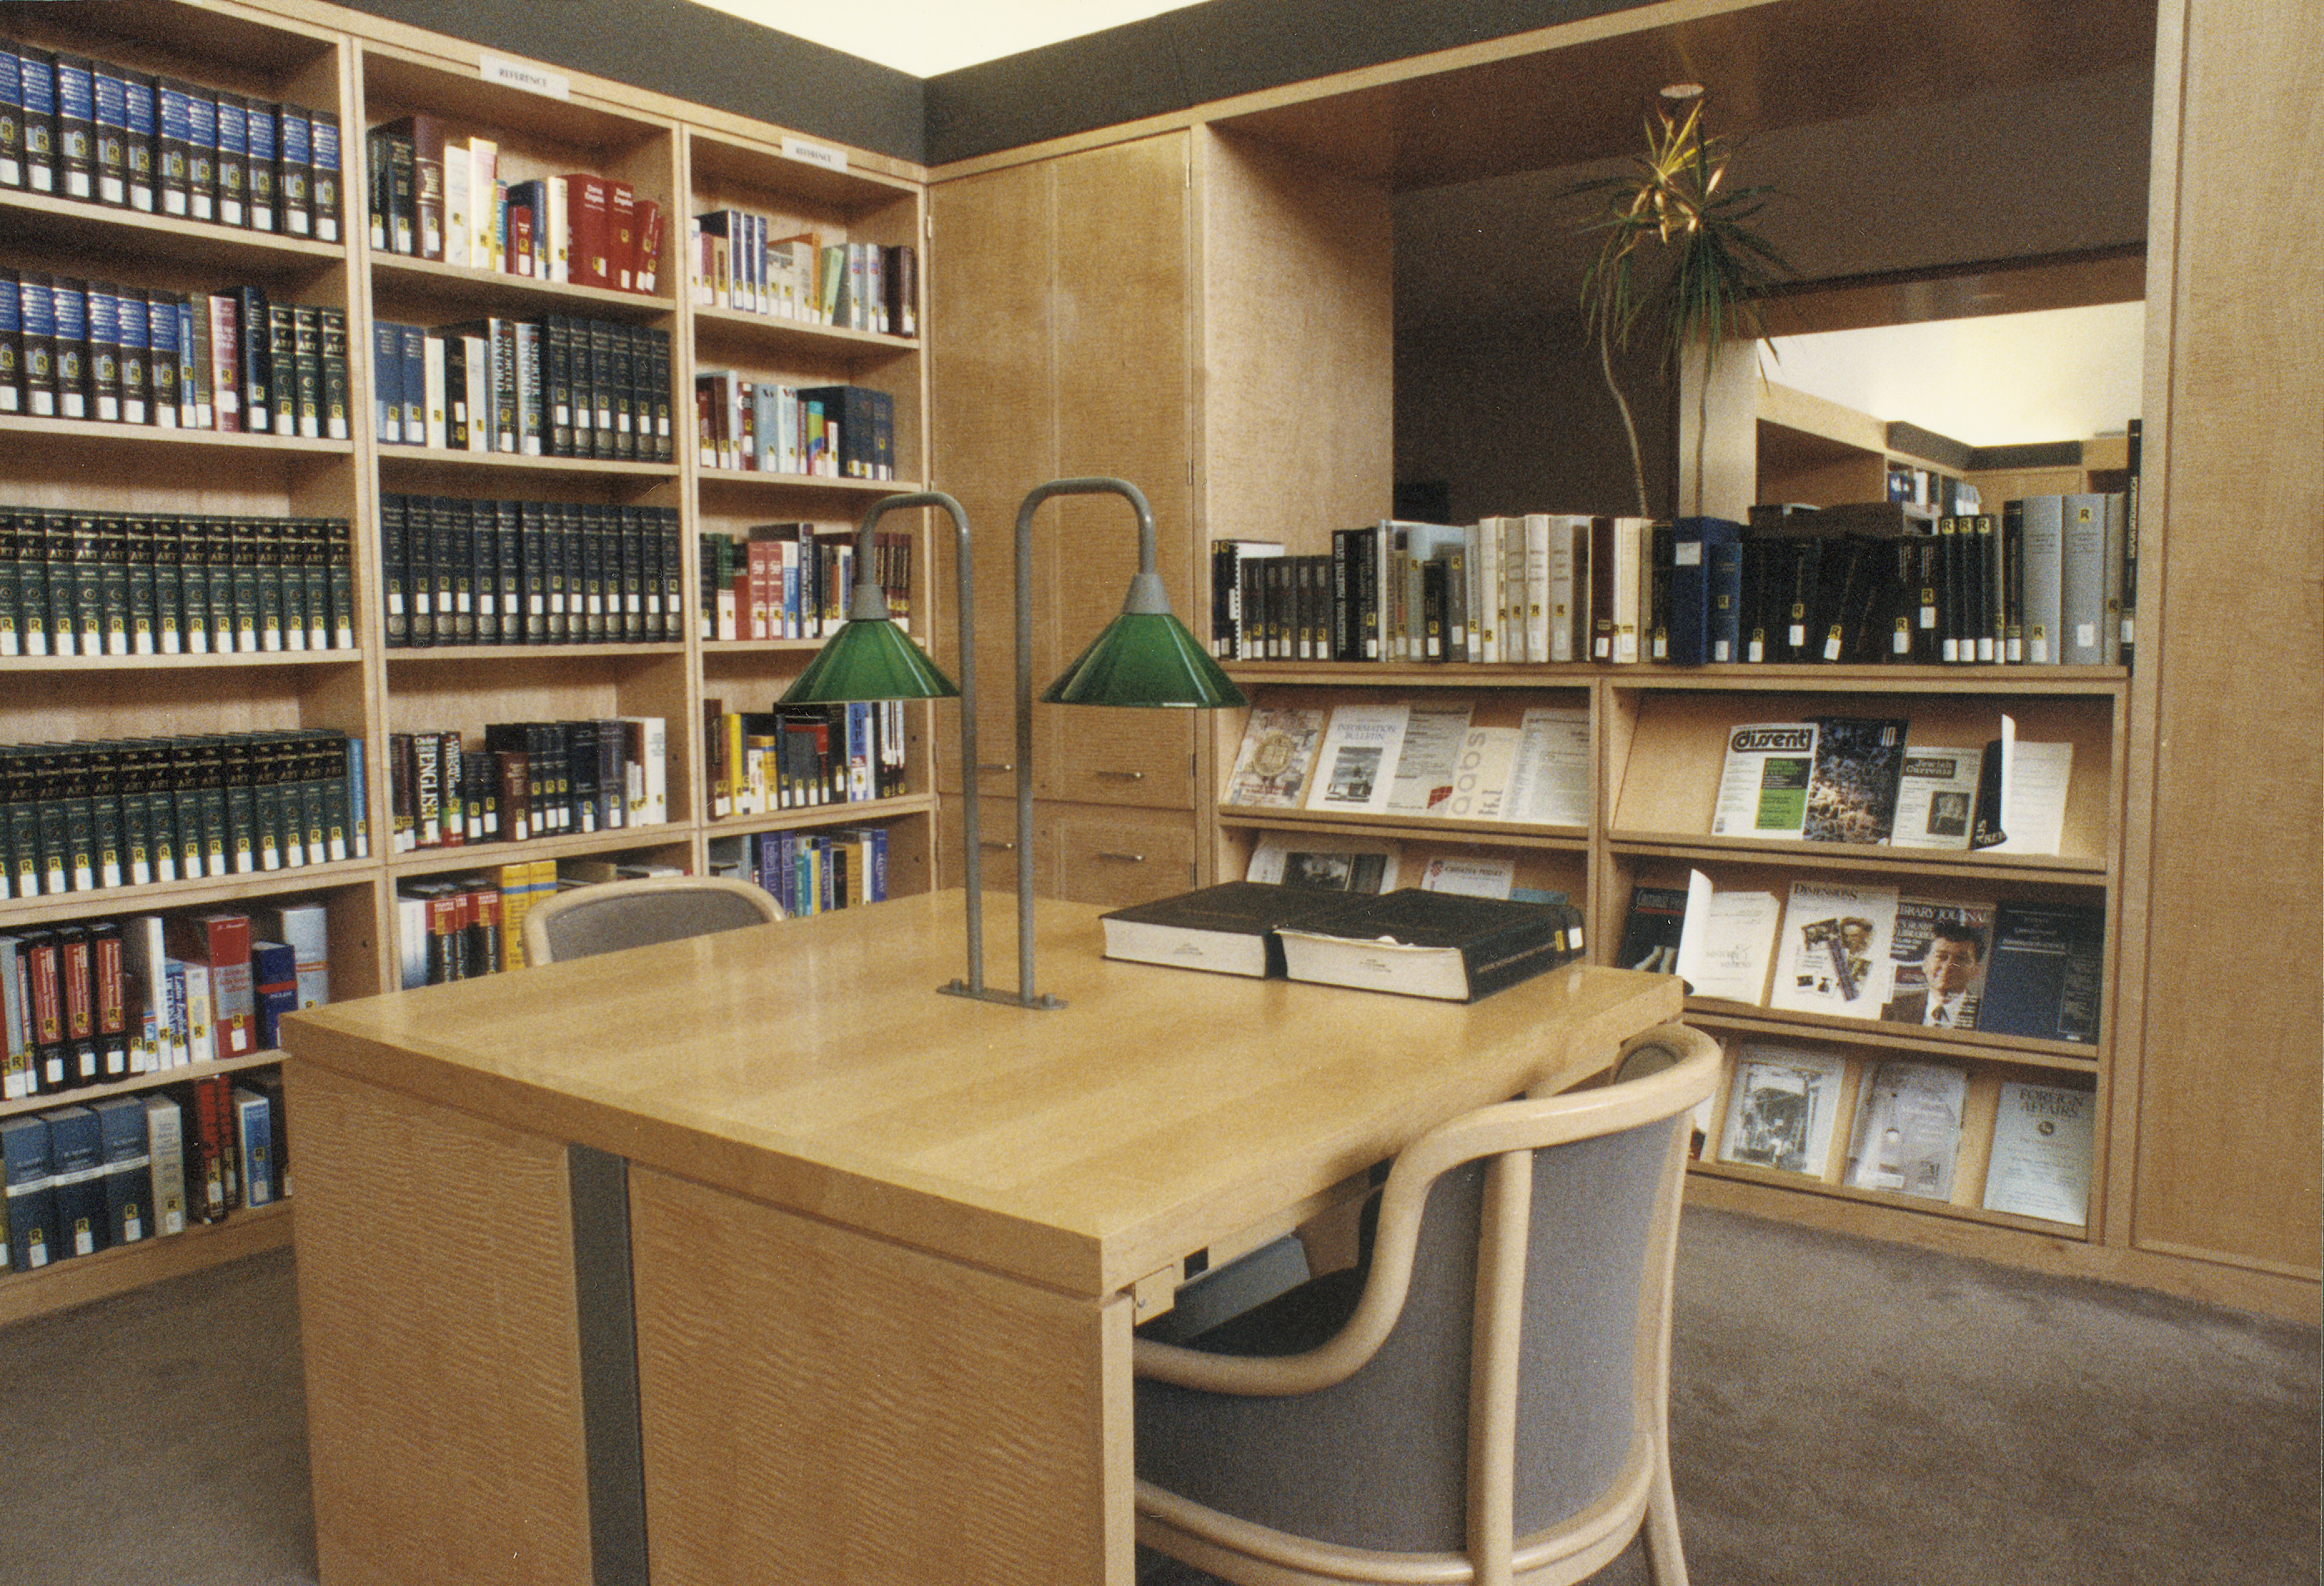 View of the library reading room on the fifth floor of the U.S. Holocaust Memorial Museum.